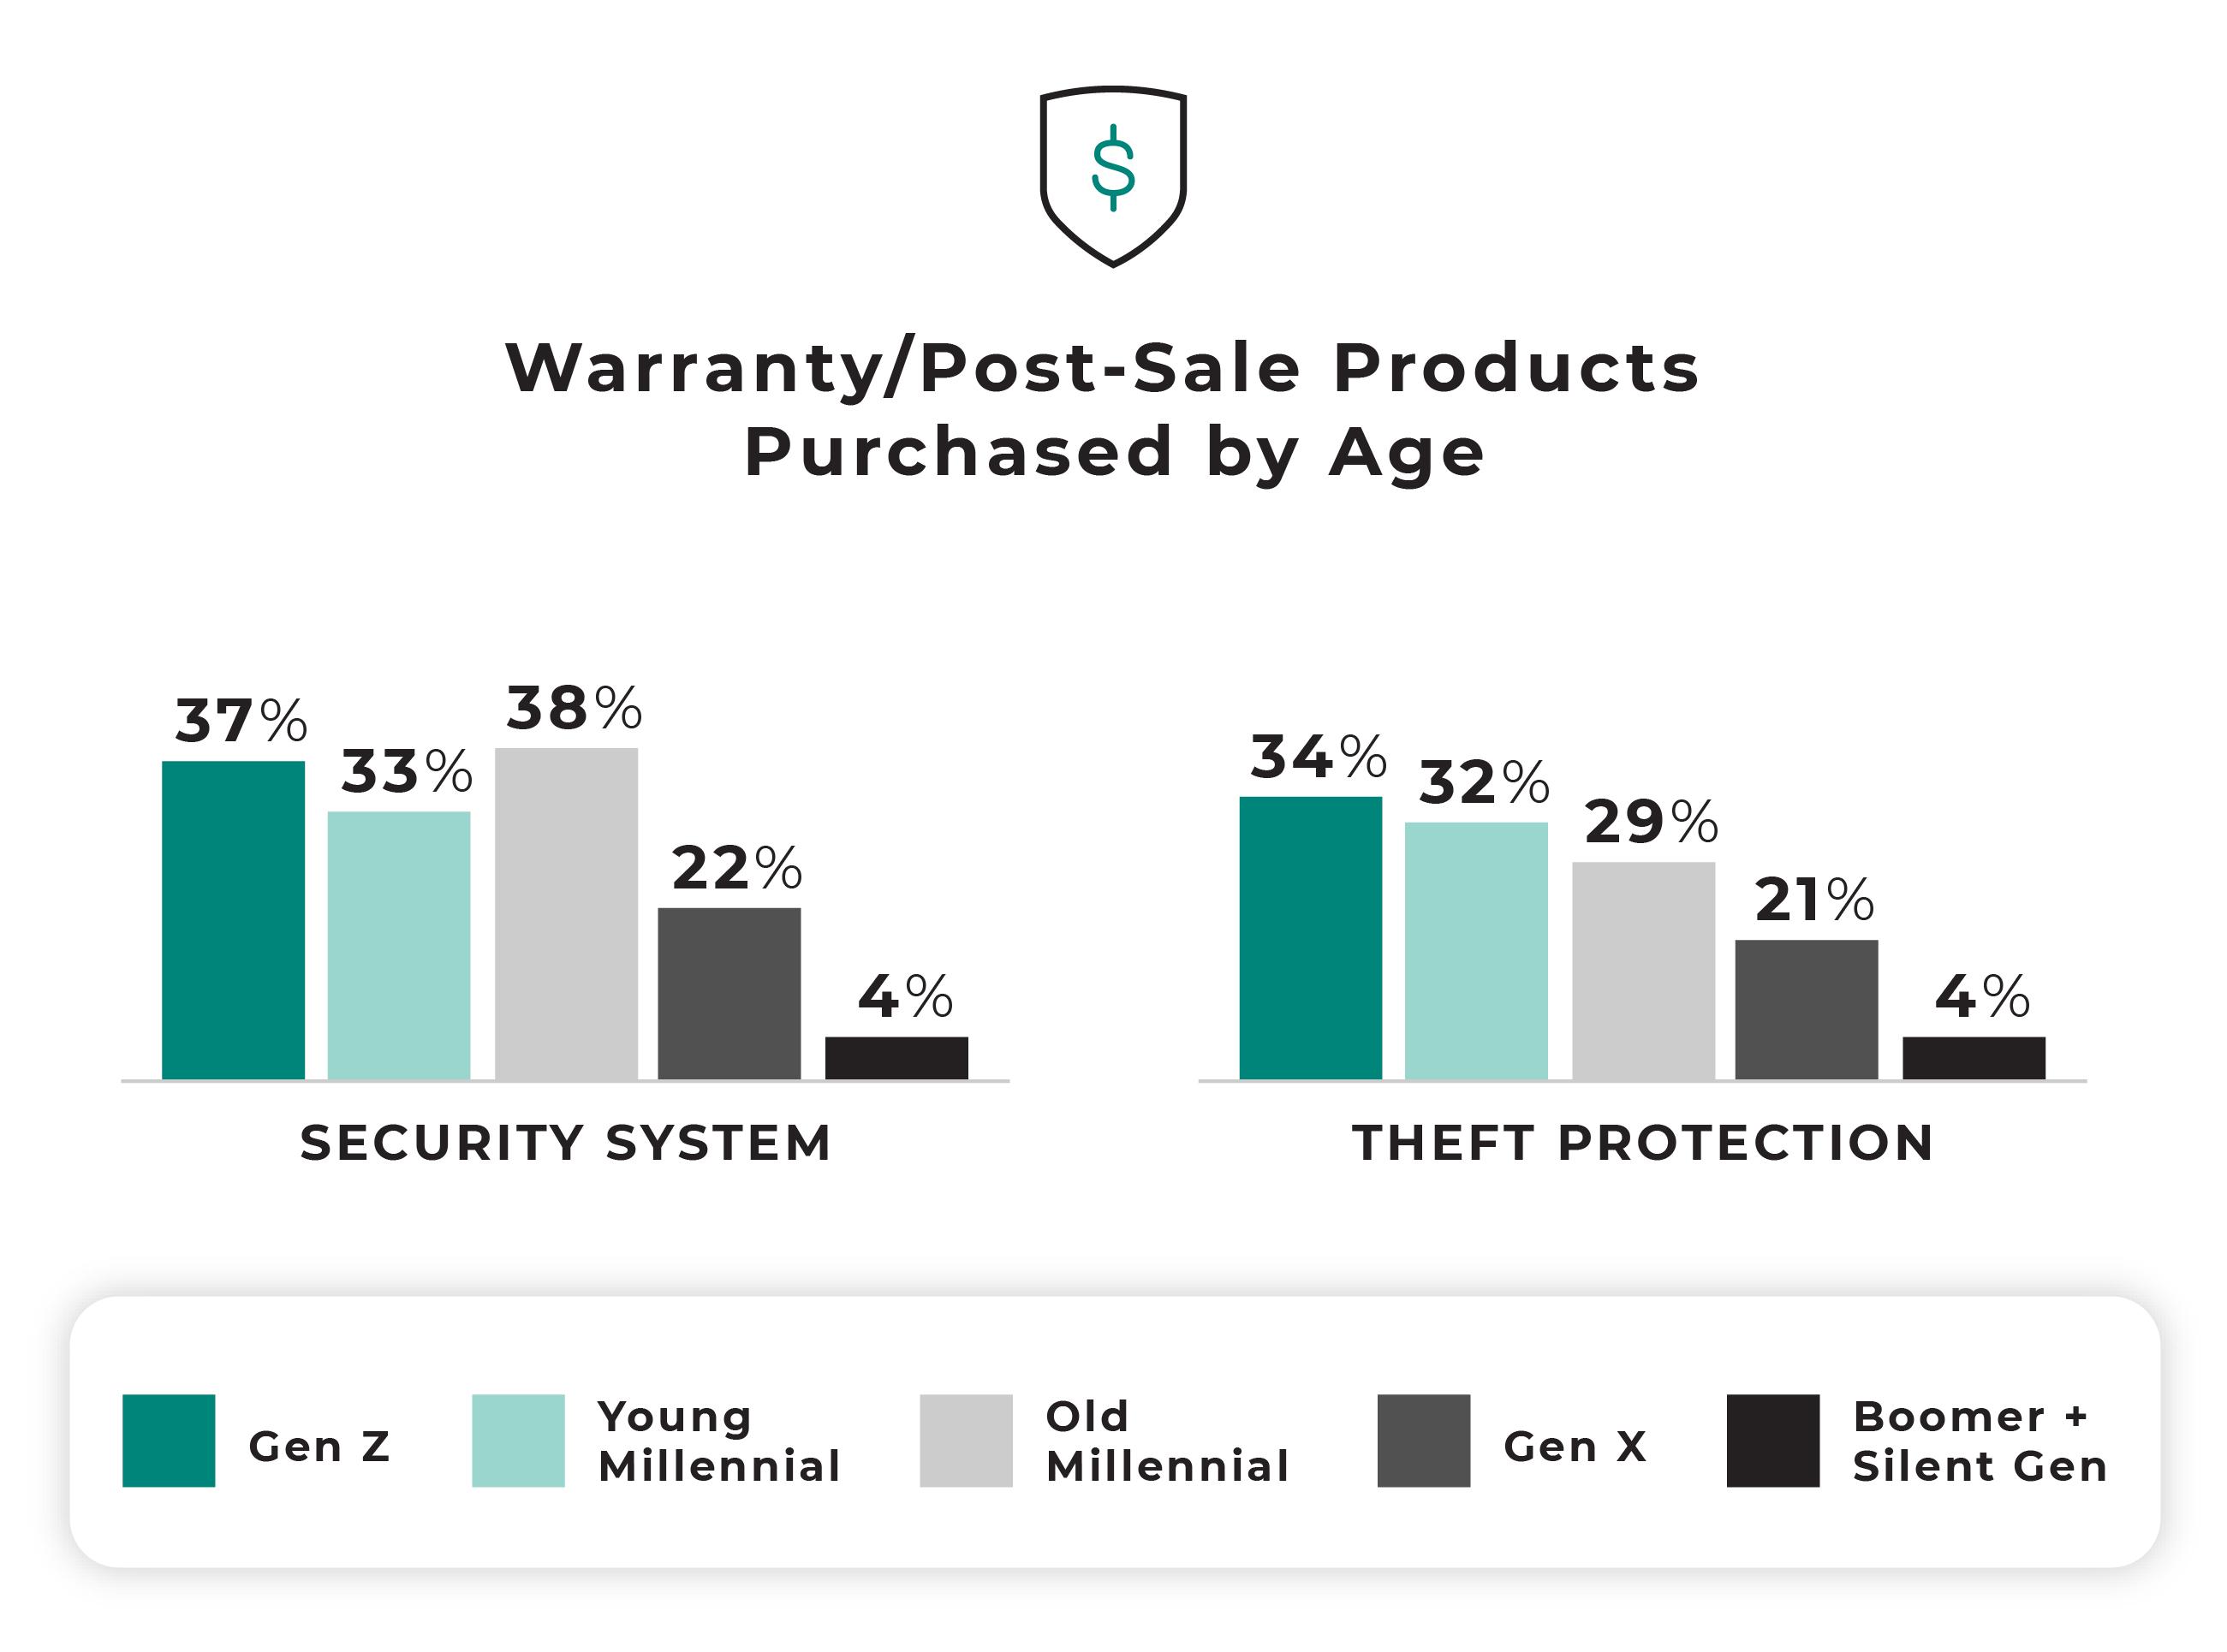 Warranty post-sale products purchased by age.